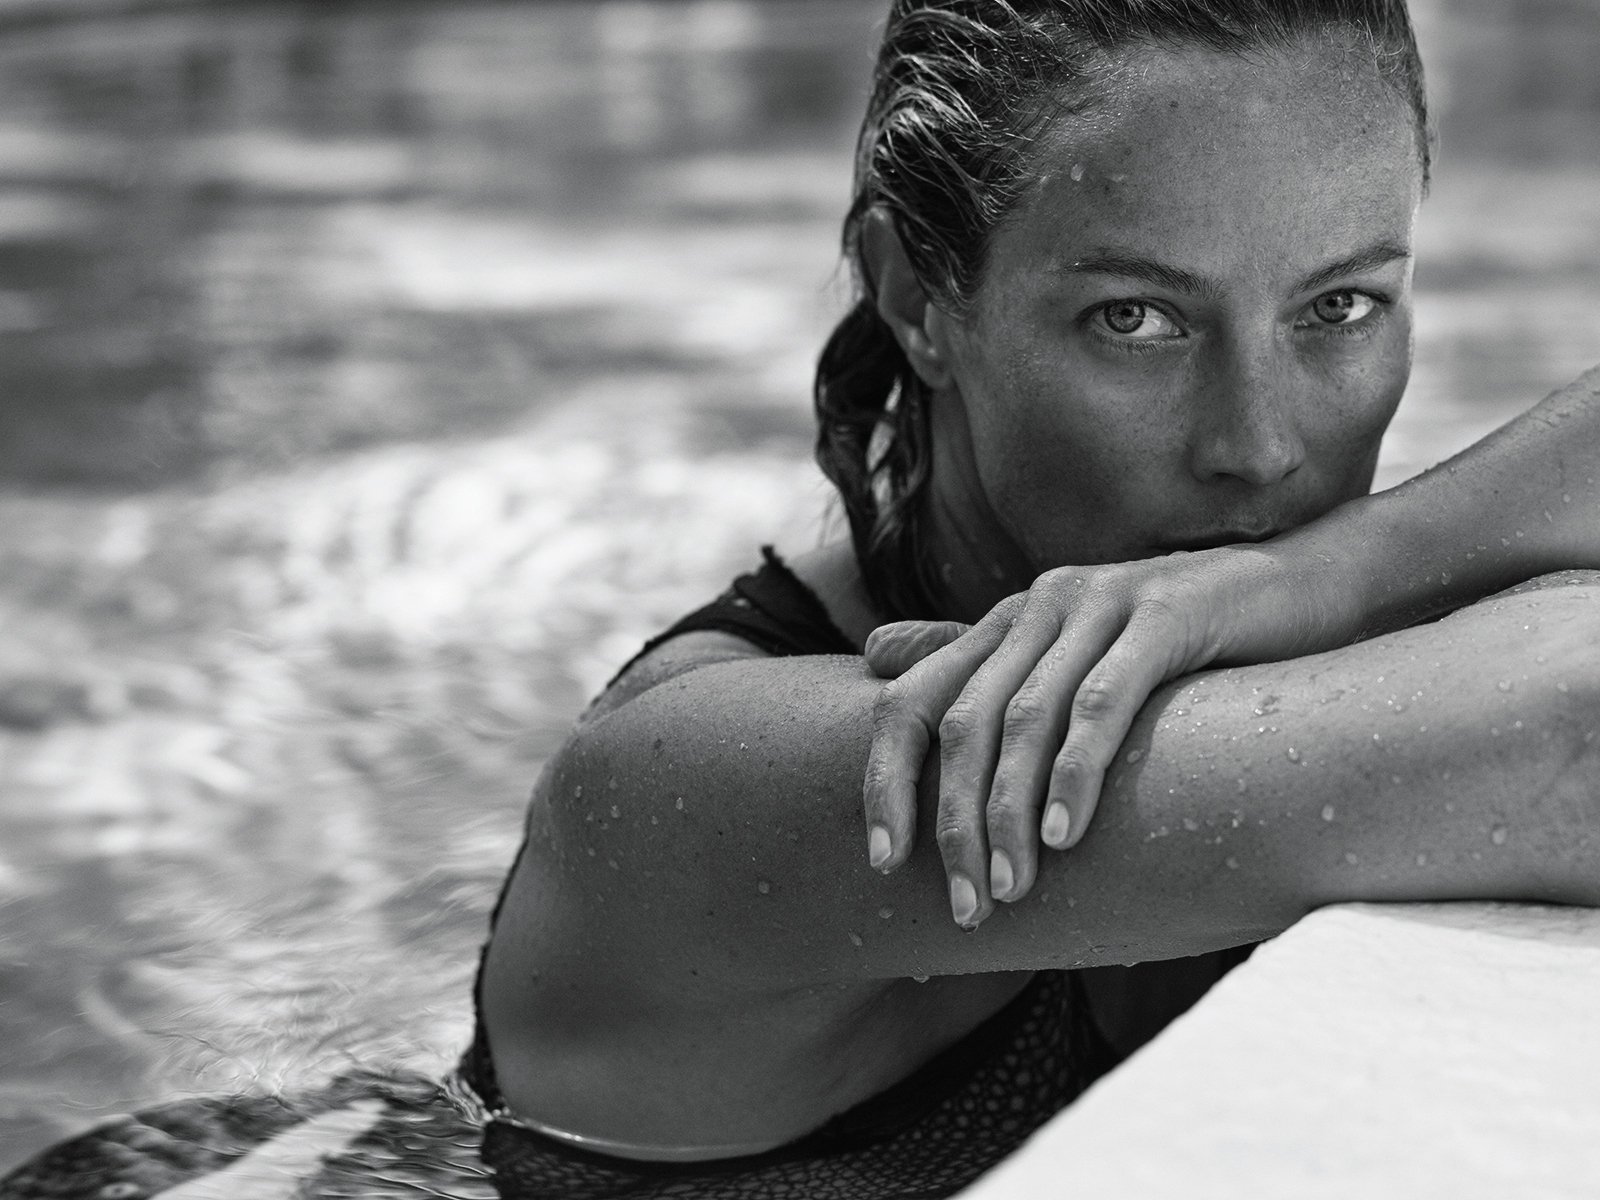 Carolyn-Murphy-by-Mikael-Jansson-Interview-March-201600003.jpeg